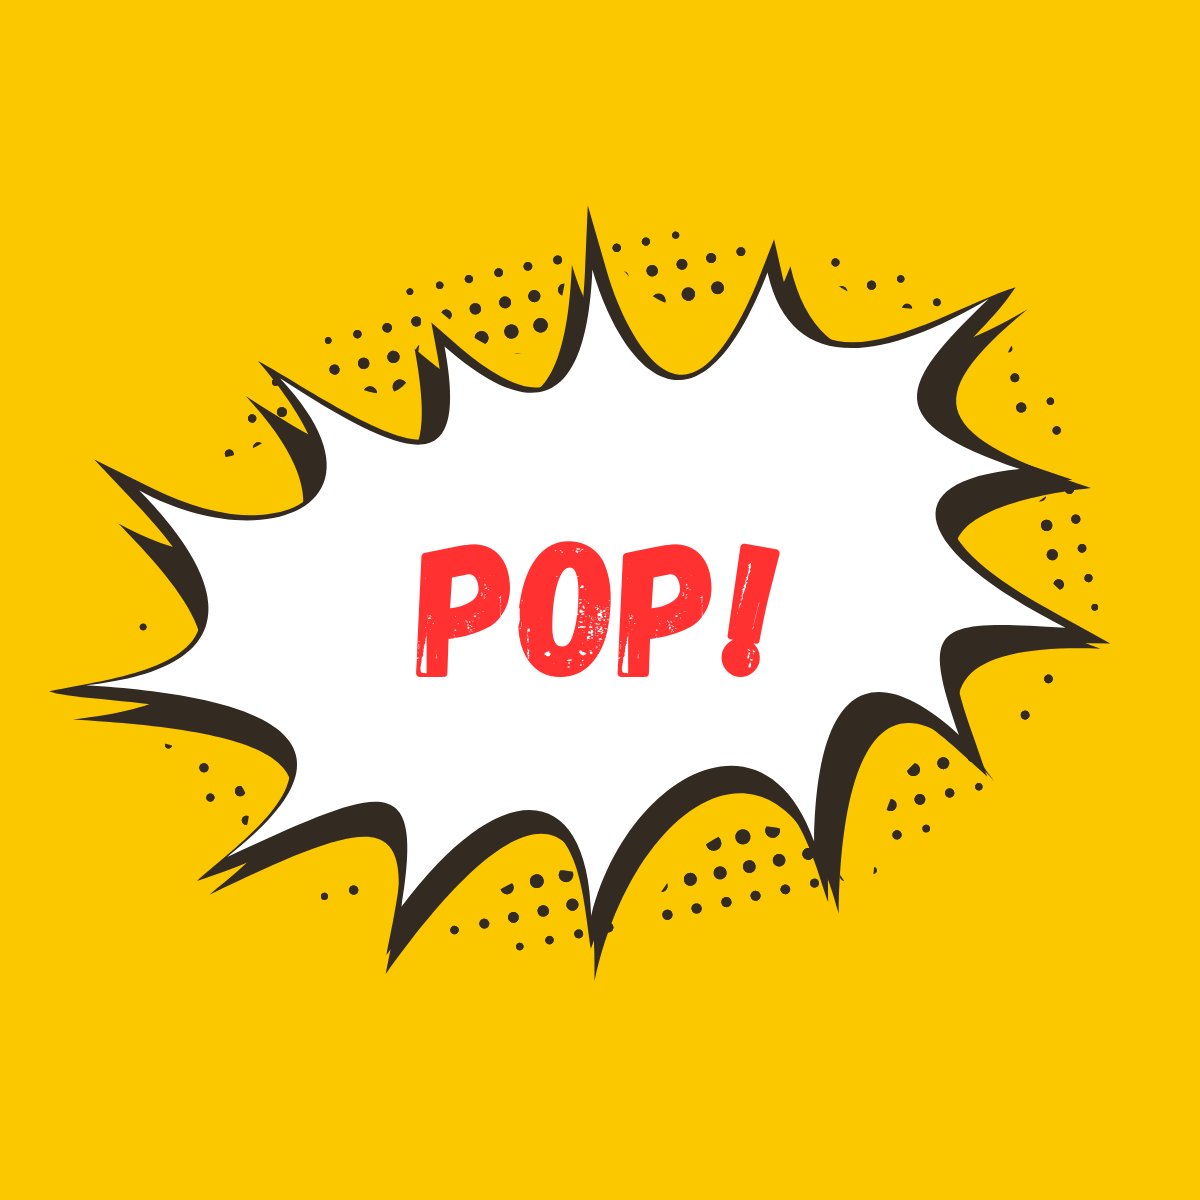 Pop! ‑ Social Proof Popups for Shopify